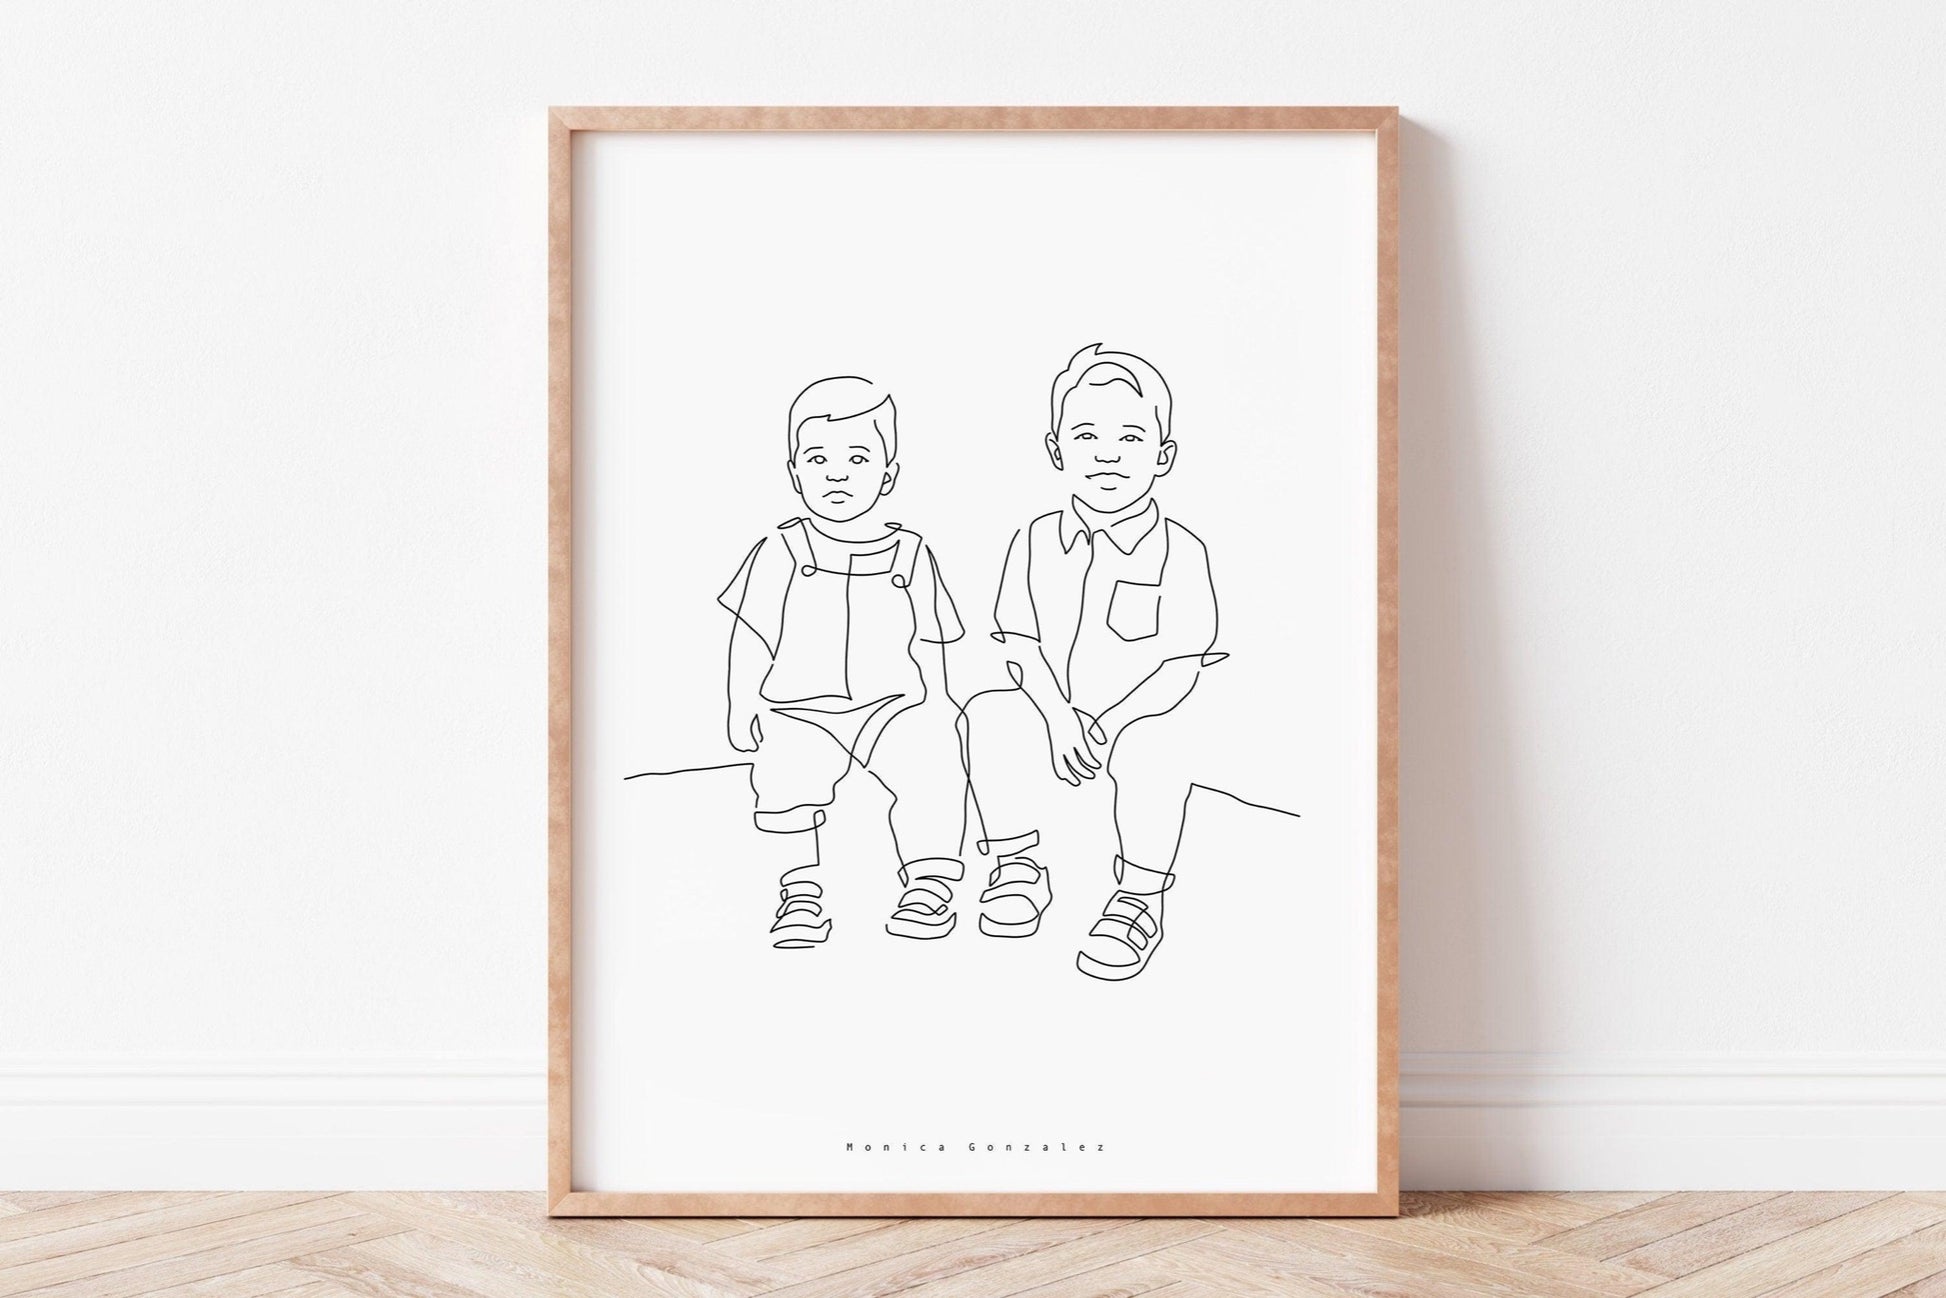 Line portrait of two kids smiling at the camera. Line art, minimalist illustration style